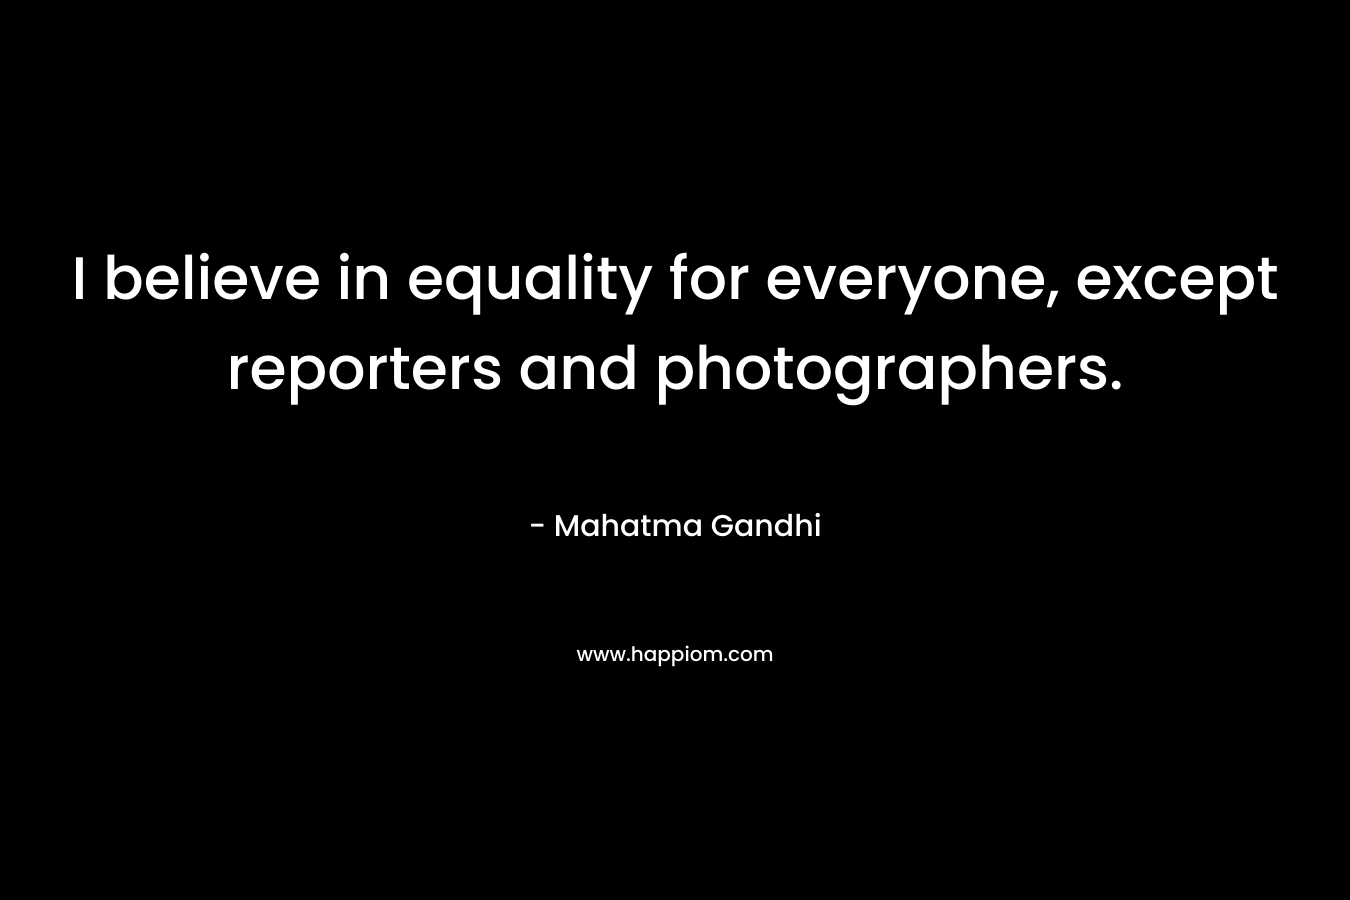 I believe in equality for everyone, except reporters and photographers. – Mahatma Gandhi